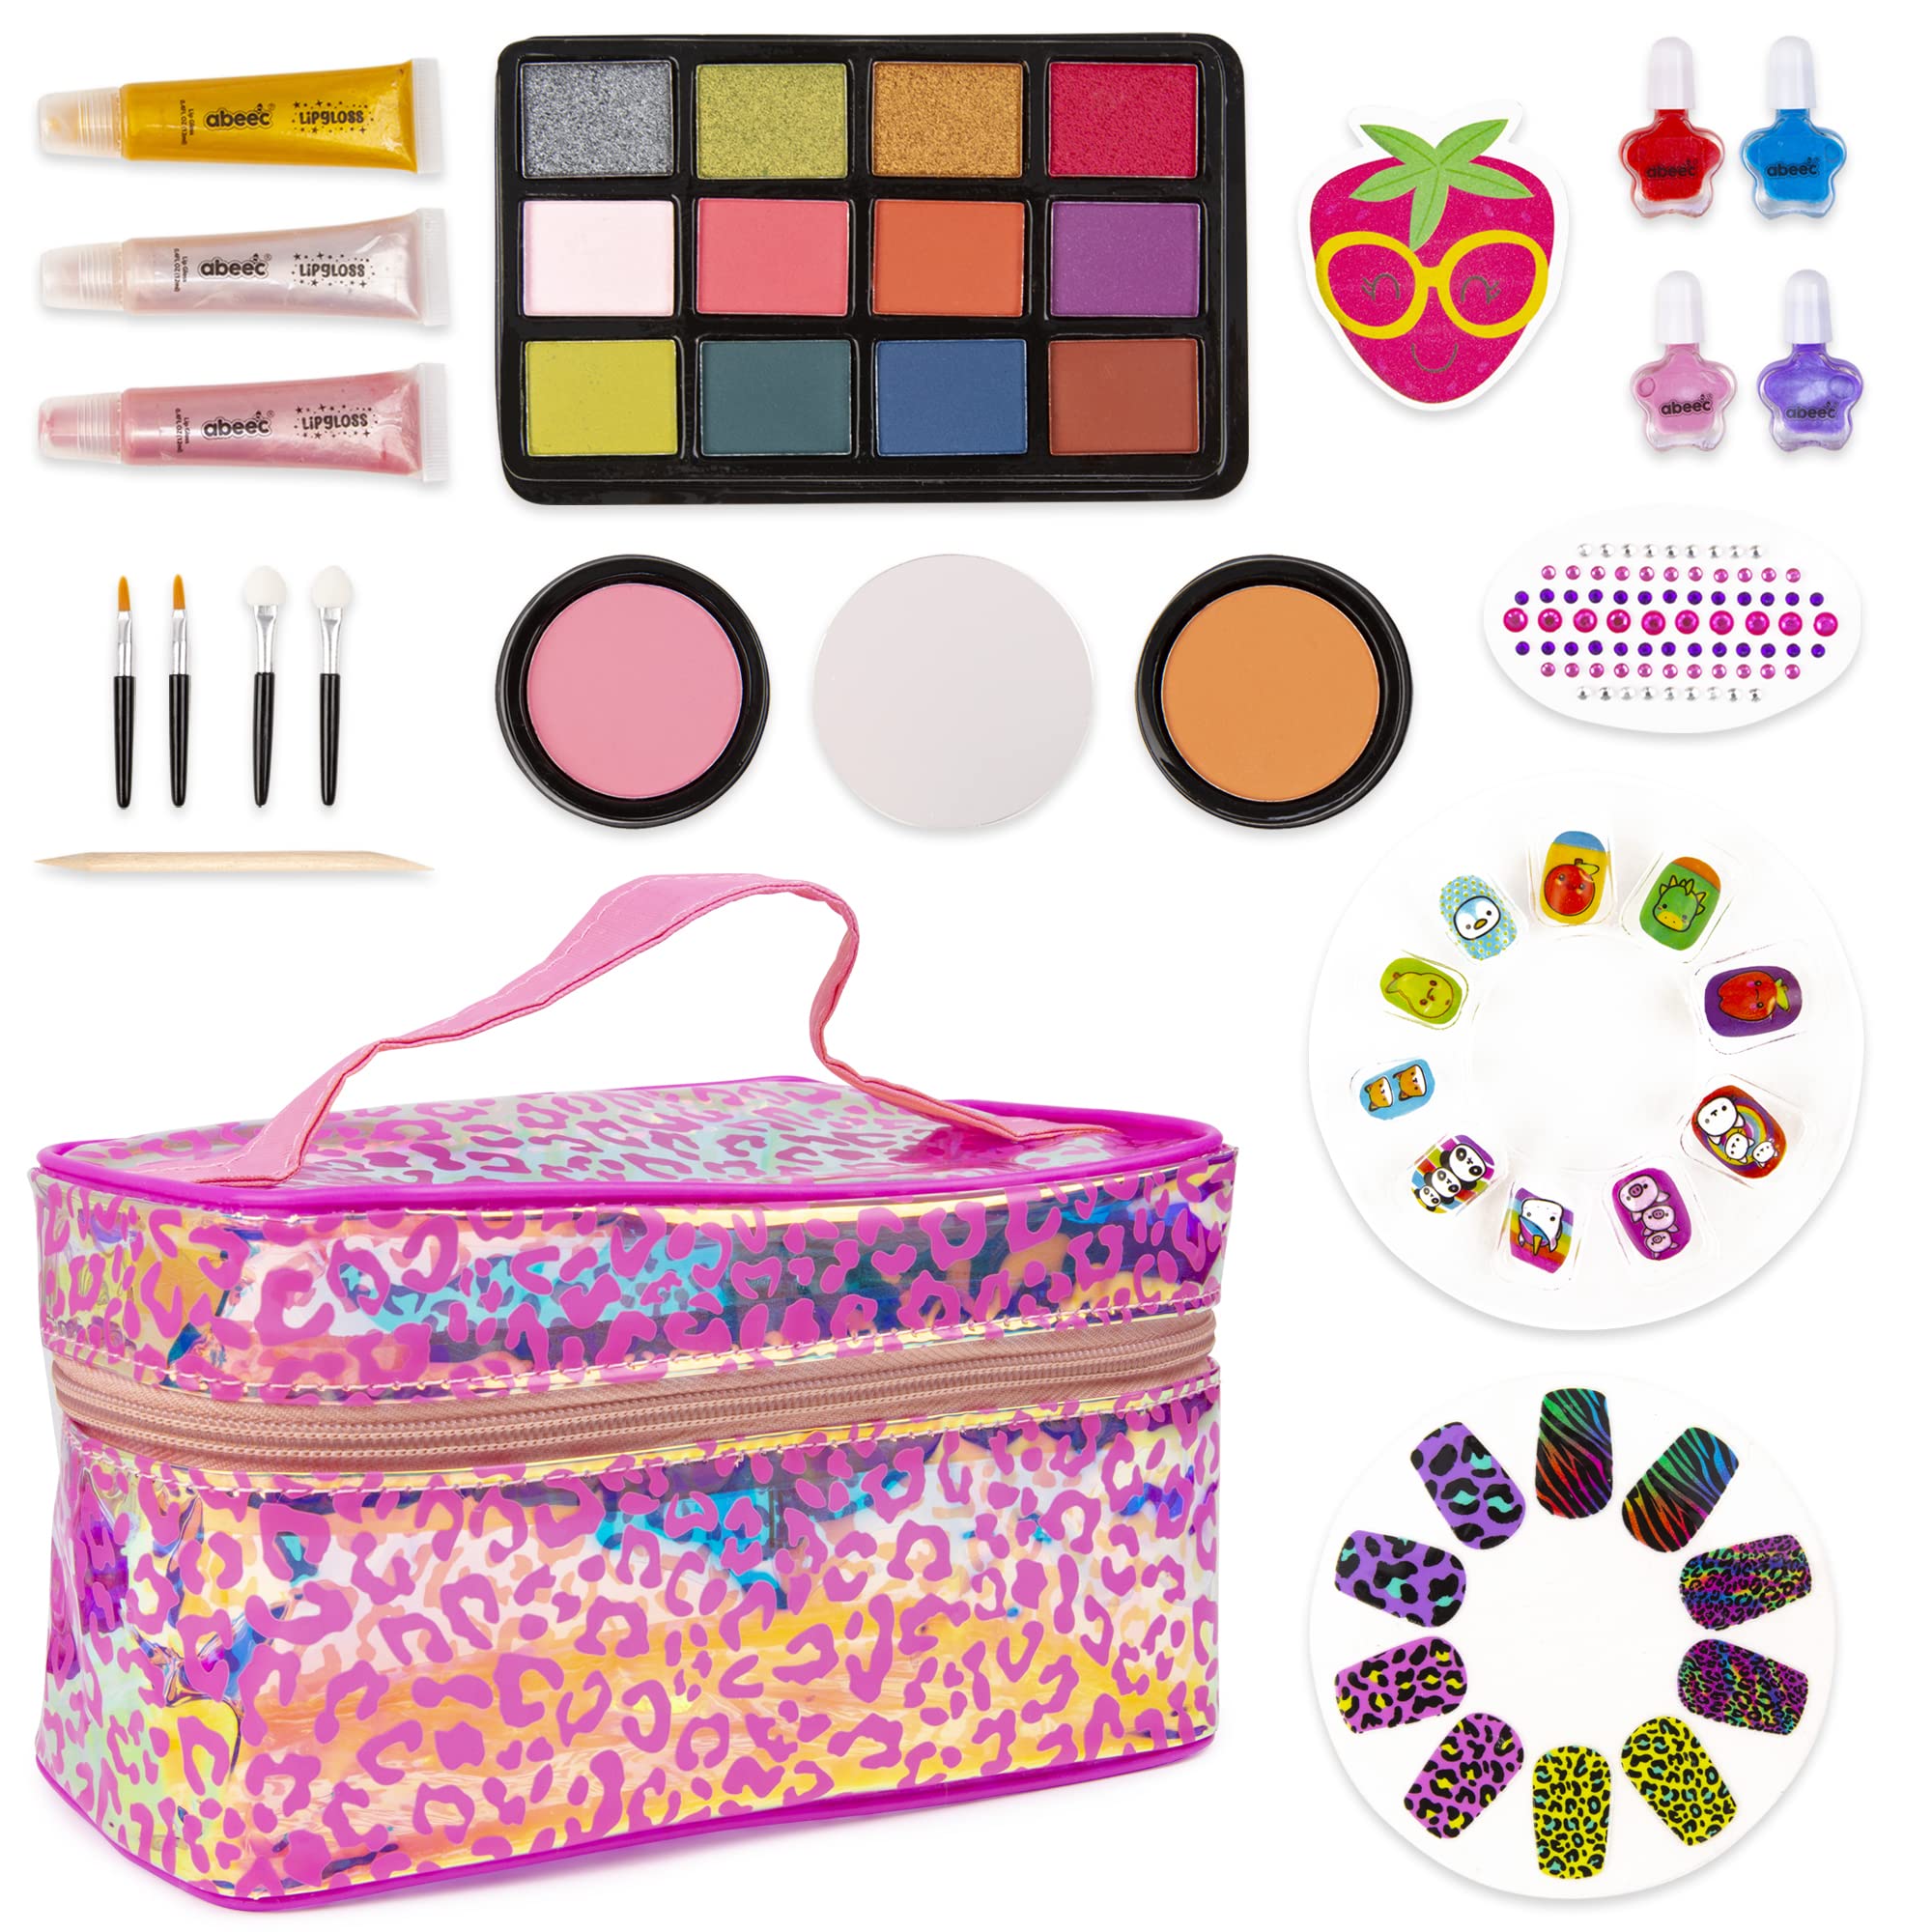 Kids Makeup Sets for Girls - Unicorn Washable Makeup Starter Kit for Teen  Girls, Pretend Play, Gifts Toys, Little Girl Birthday Gifts for 3 4 5 6 7 8  9 10 11 12 Year Old Kids : Amazon.com.be: Toys